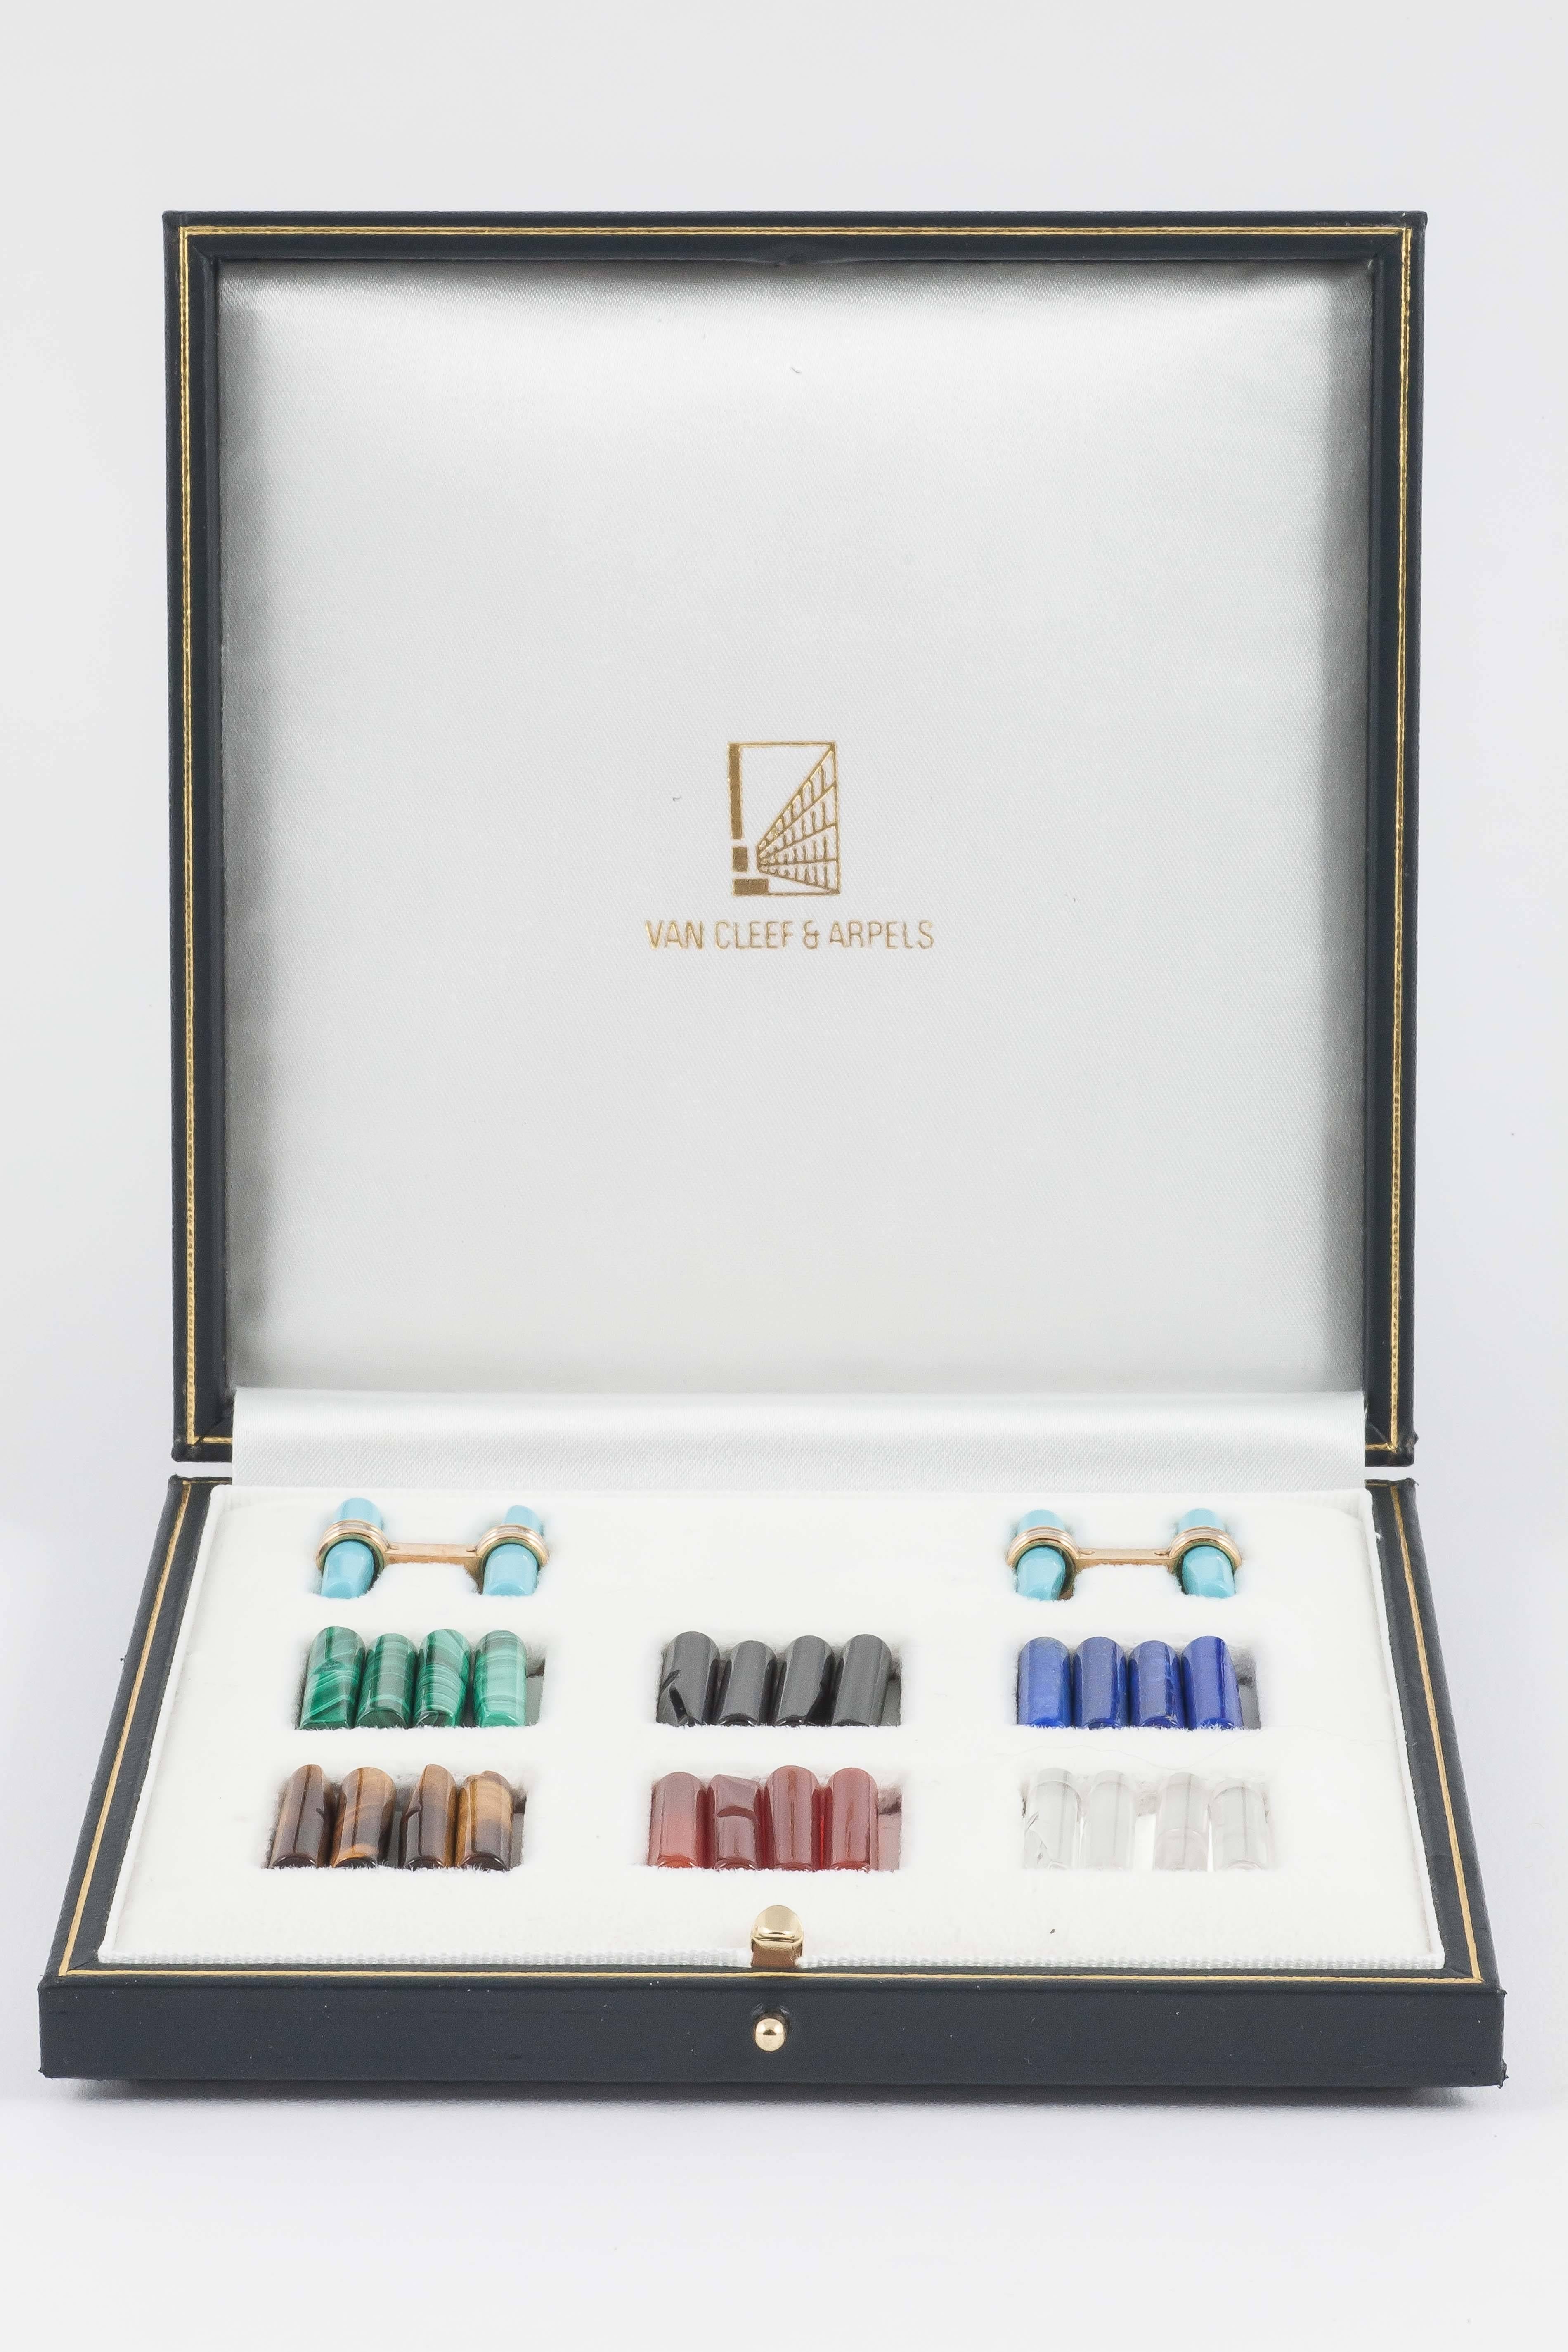 A set of coloured stone baton cufflinks by Van Cleef and Arpels in 18ct gold with interchangeable batons,Turquoise,Malachite,onyx,Lapis Lazuli,Tigers Eye,Cornelian,Crystal.Numbered B9107198.Stamped Or 750 and VCAwith french Eagles head stamp